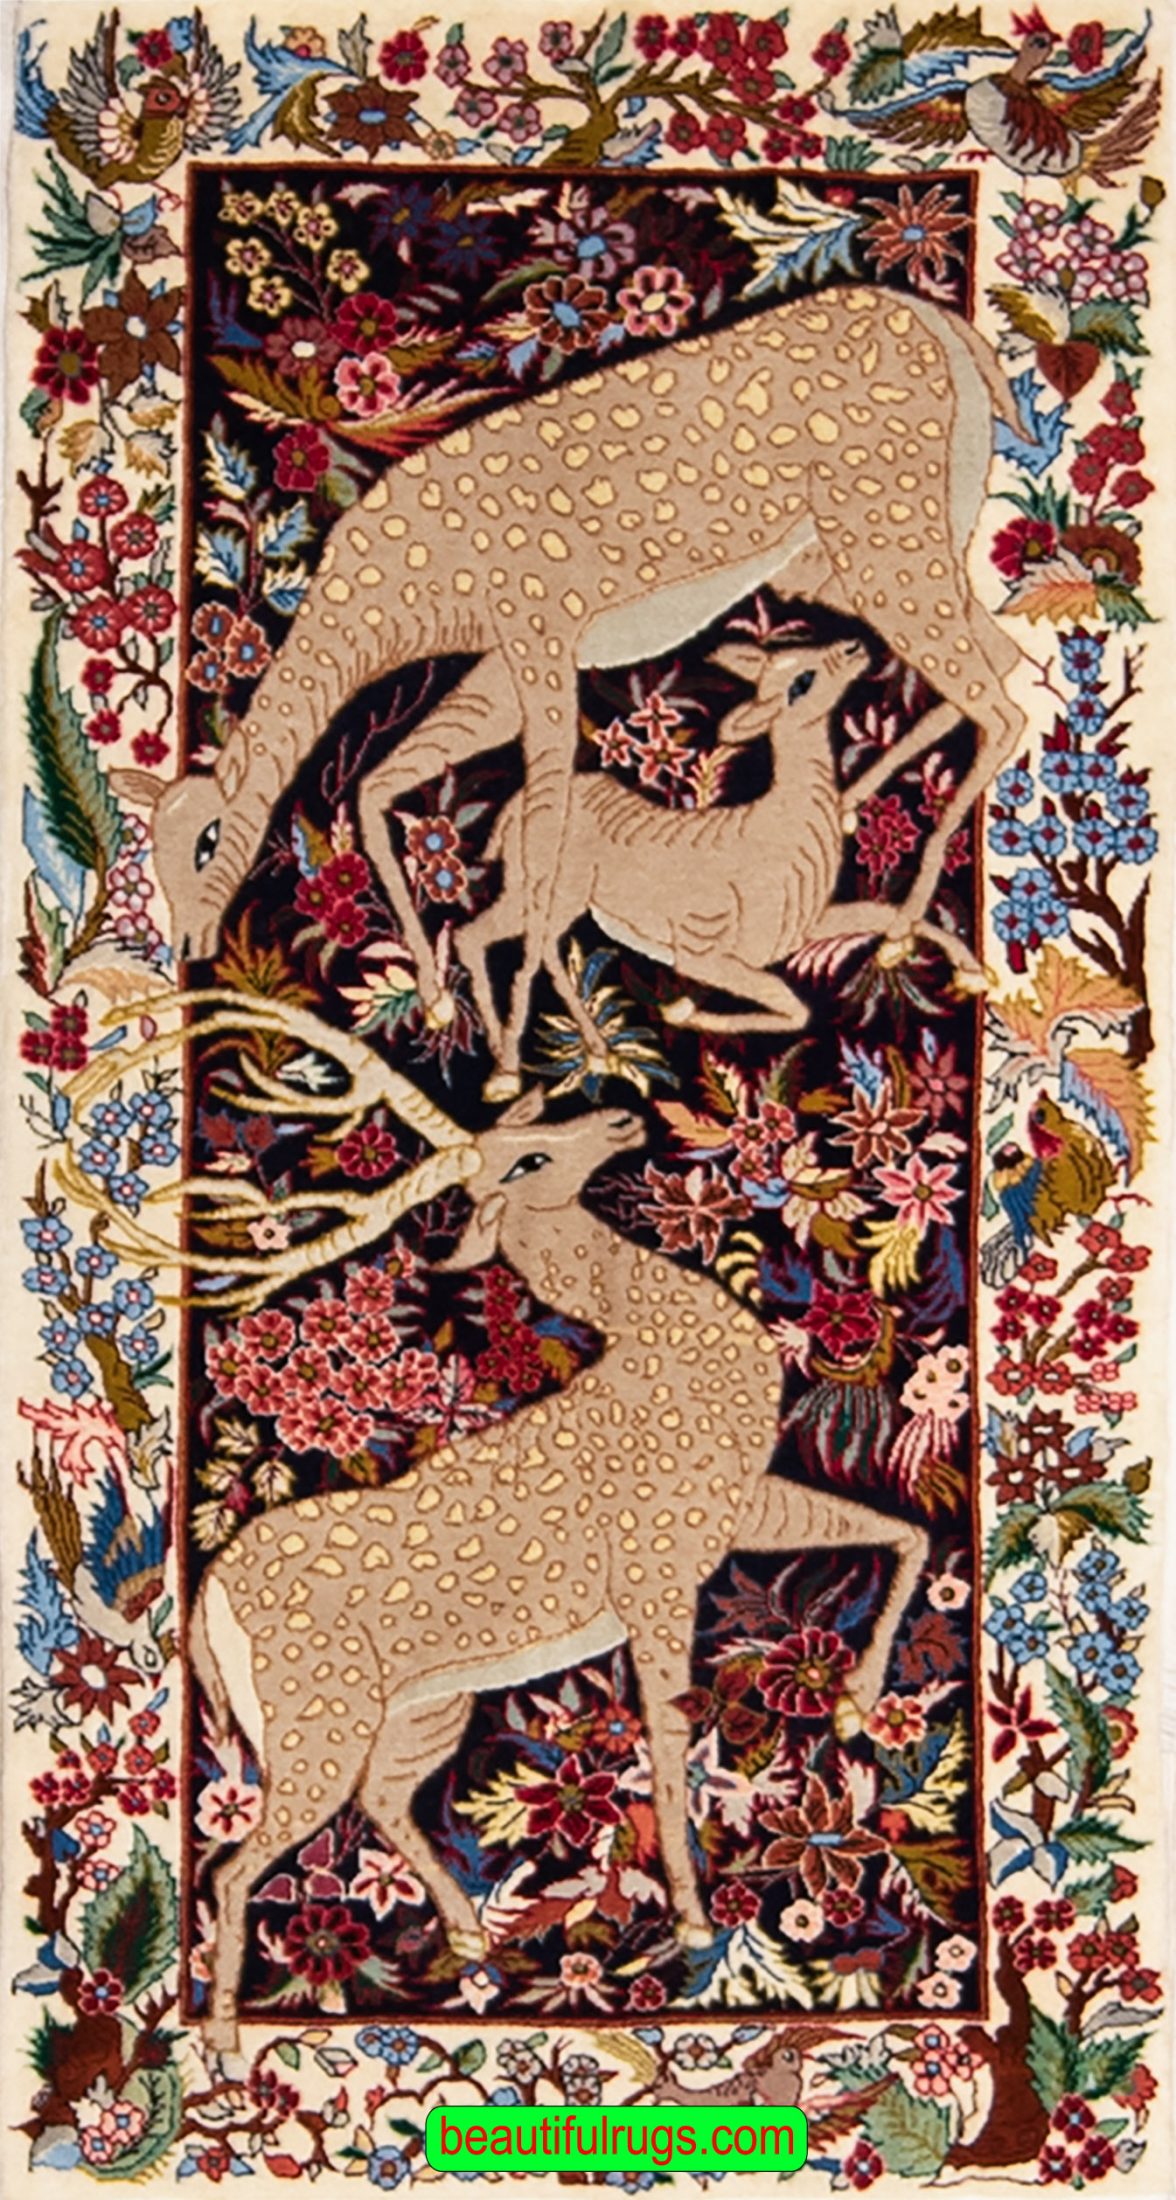 Handmade Persian Sarouk rugs with Deer motifs, flowers and birds, multicolor rugs. Size 2.4x4.2.